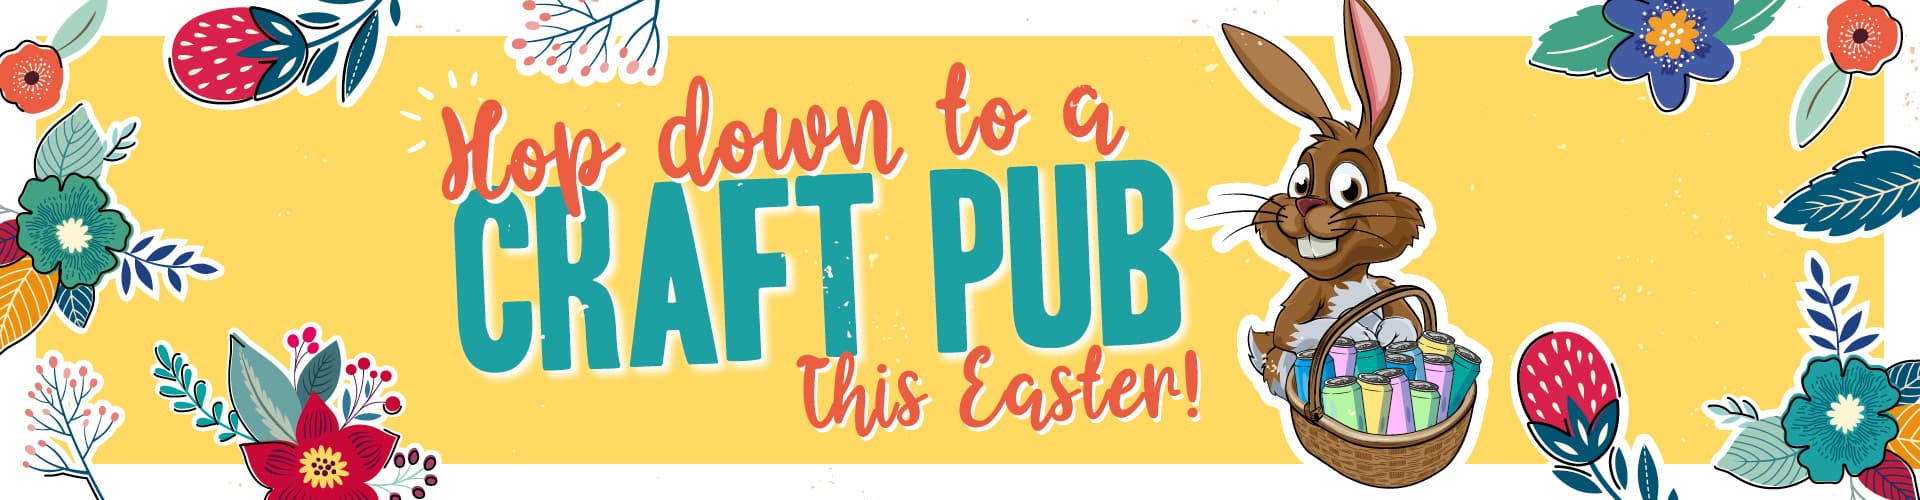 Hop down to a Craft Pub this Easter!